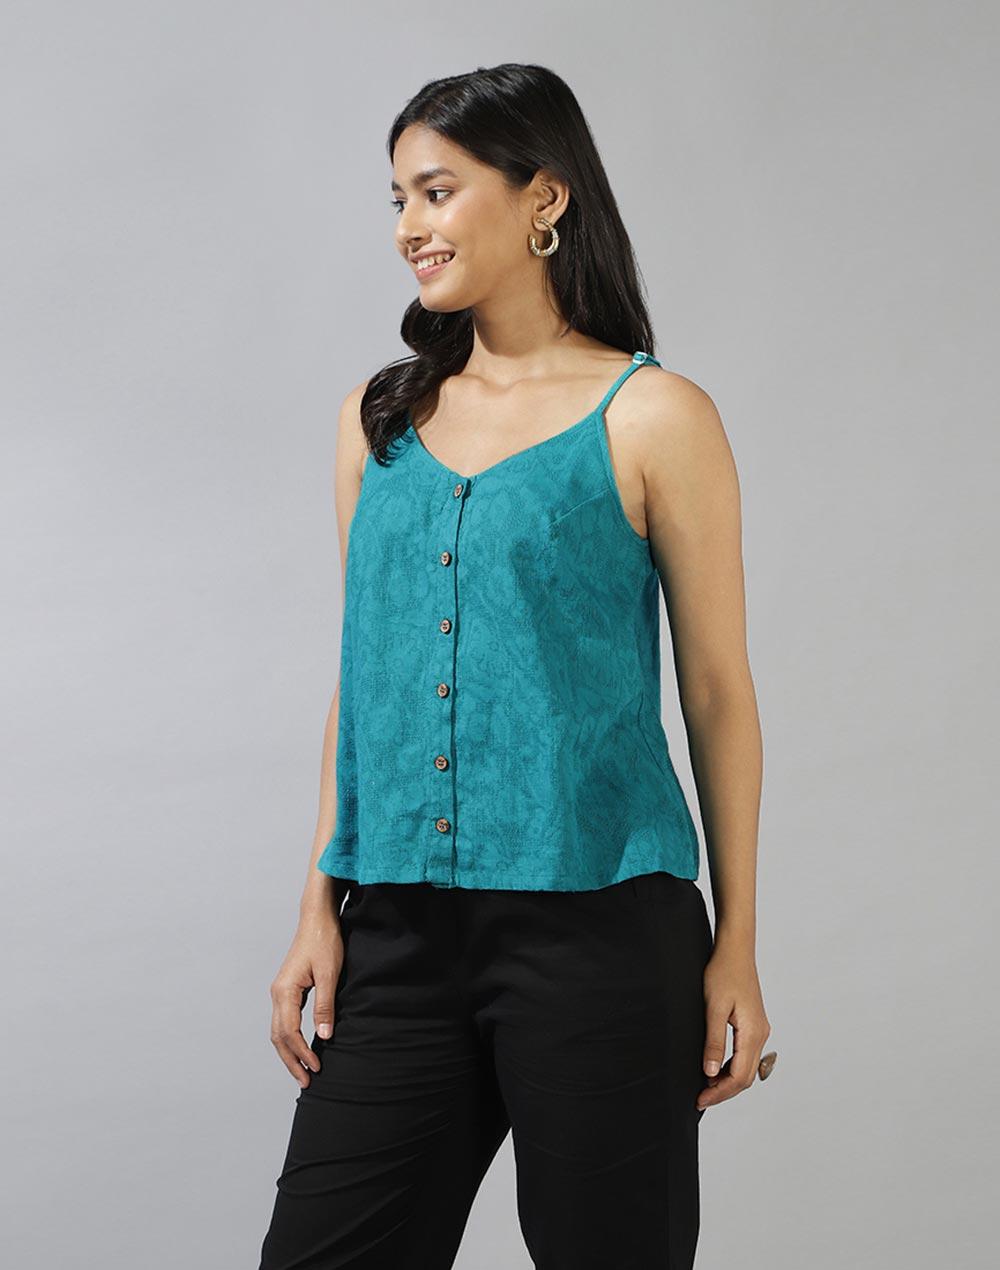 fabnu-turquoise-cotton-woven-camisole